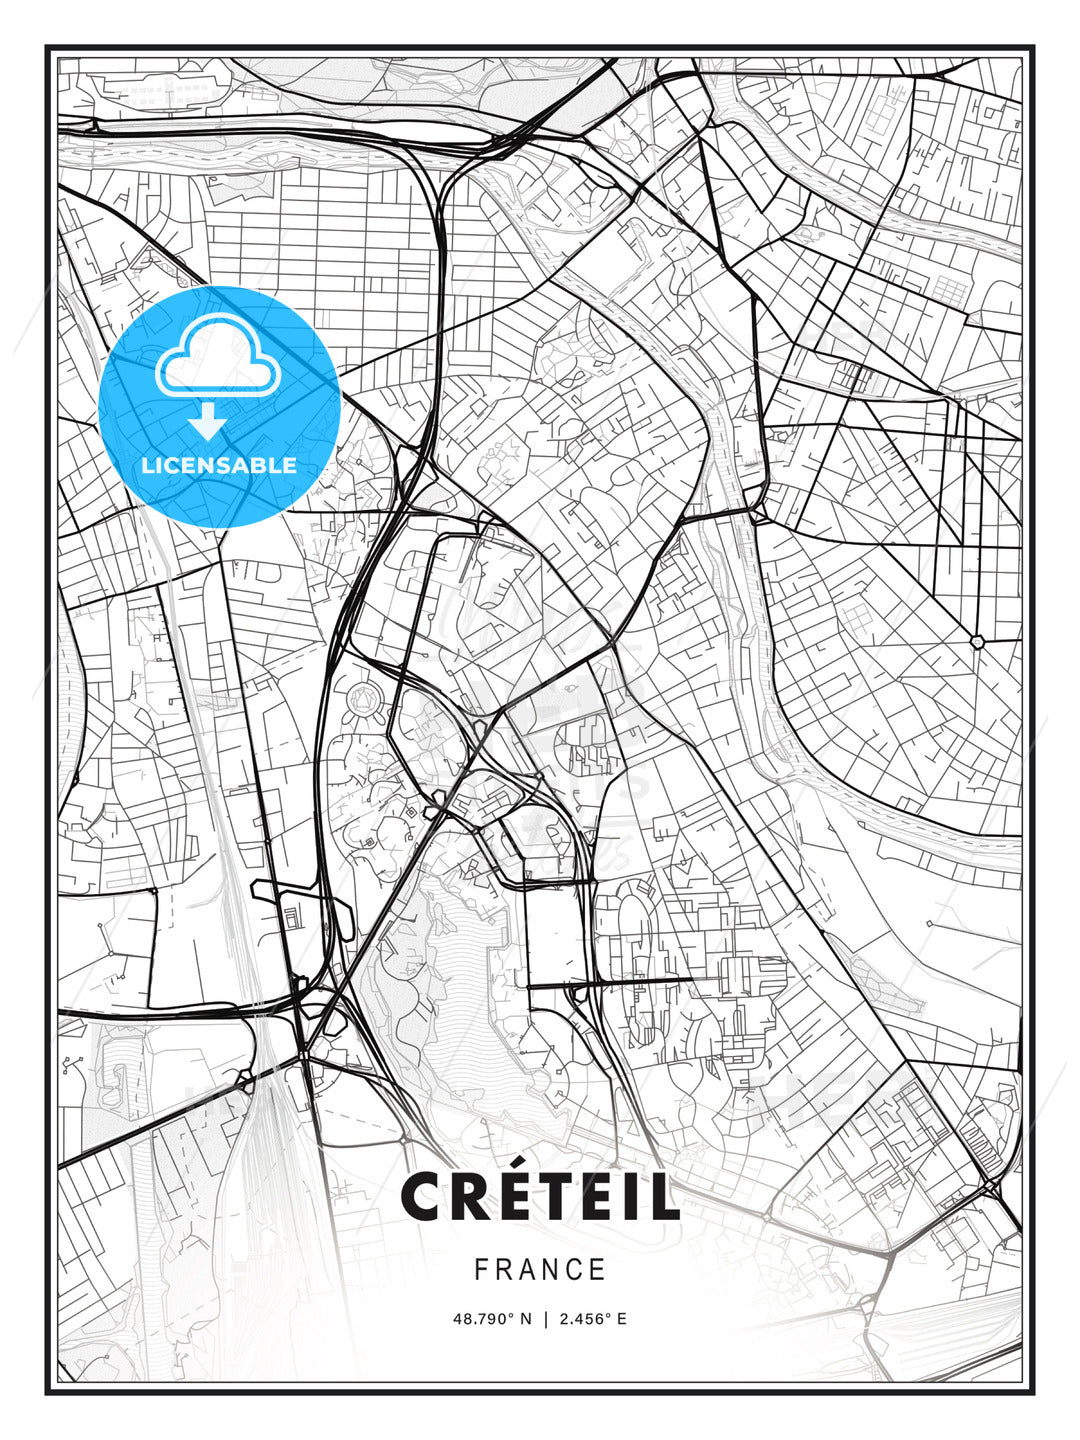 Créteil, France, Modern Print Template in Various Formats - HEBSTREITS Sketches